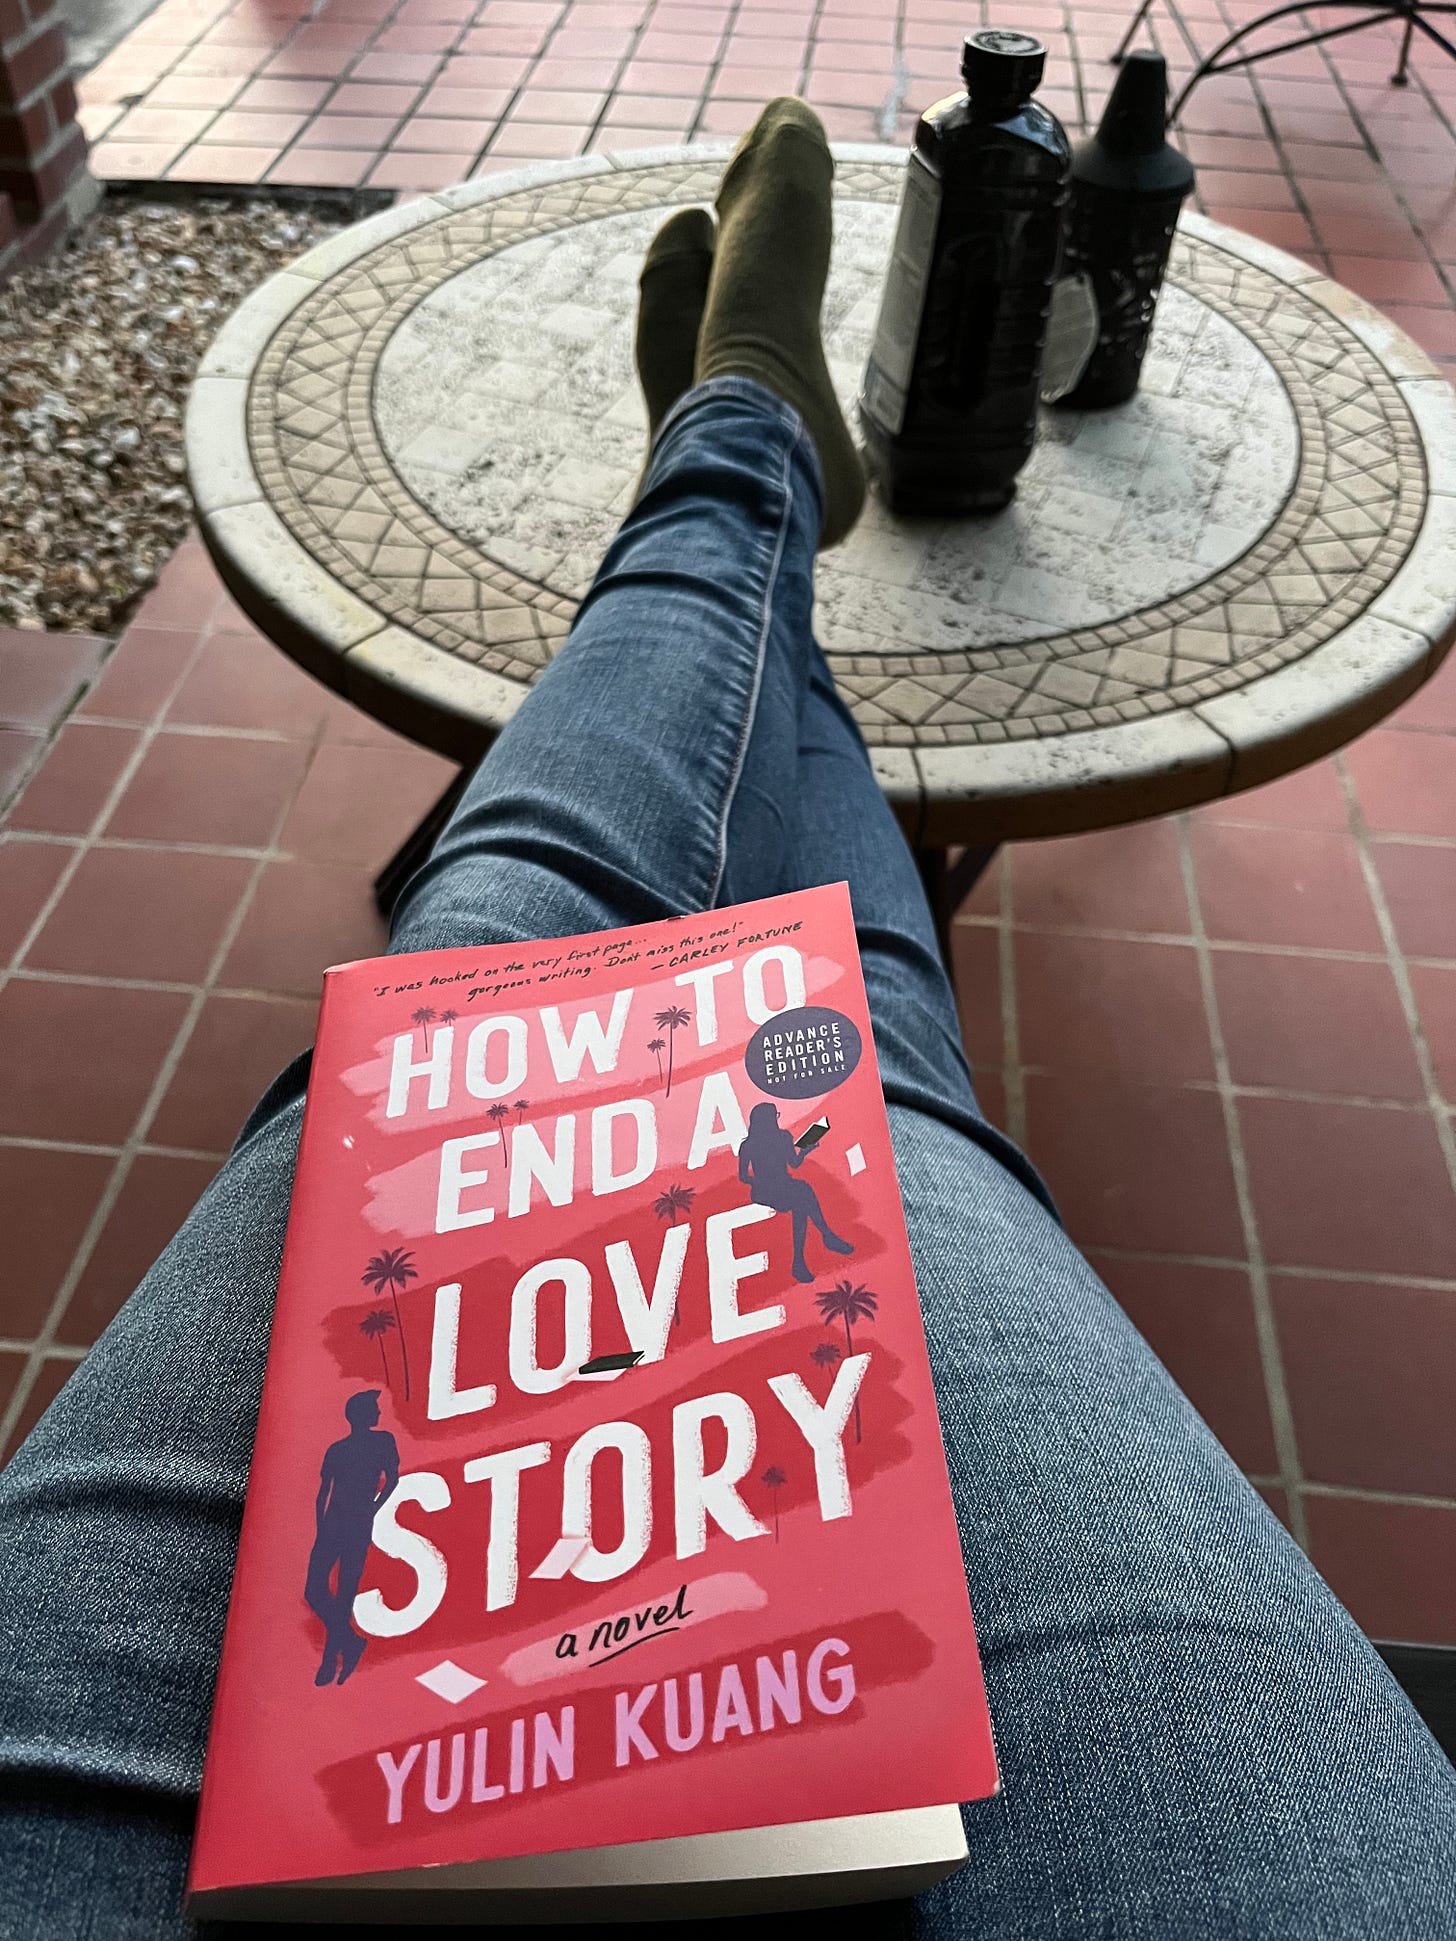 Picture of my legs stretched out and resting on a patio table, green socks on my feet and jeans covering my legs, with an advance copy of HOW TO END A LOVE STORY in my lap